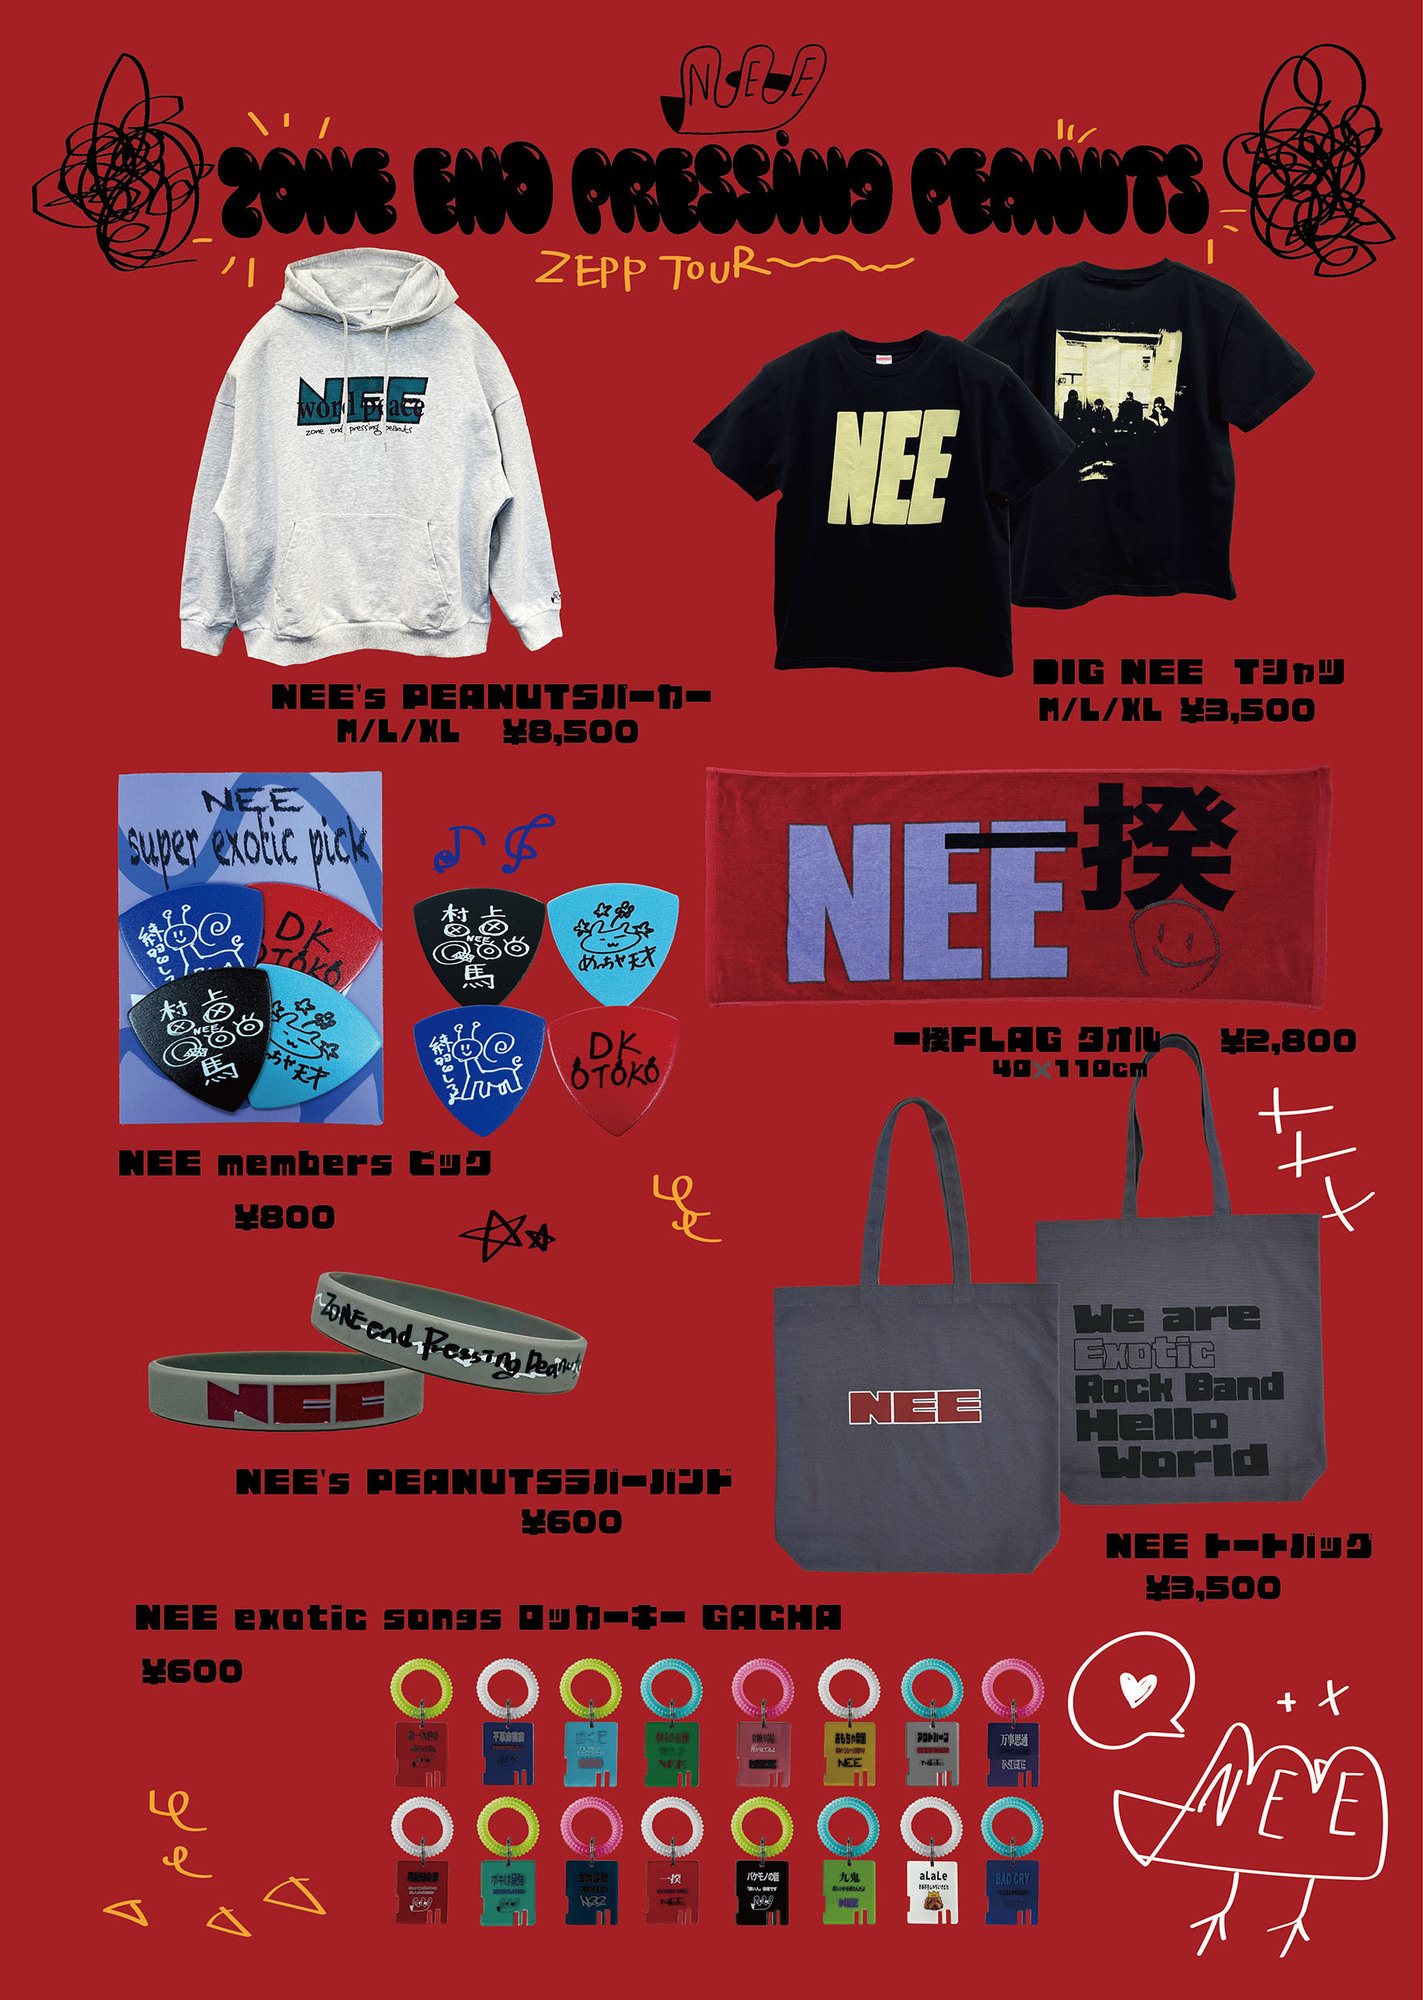 NEE 7th TOUR「Zone End Pressing Peanuts」新グッズ解禁！会場先行 